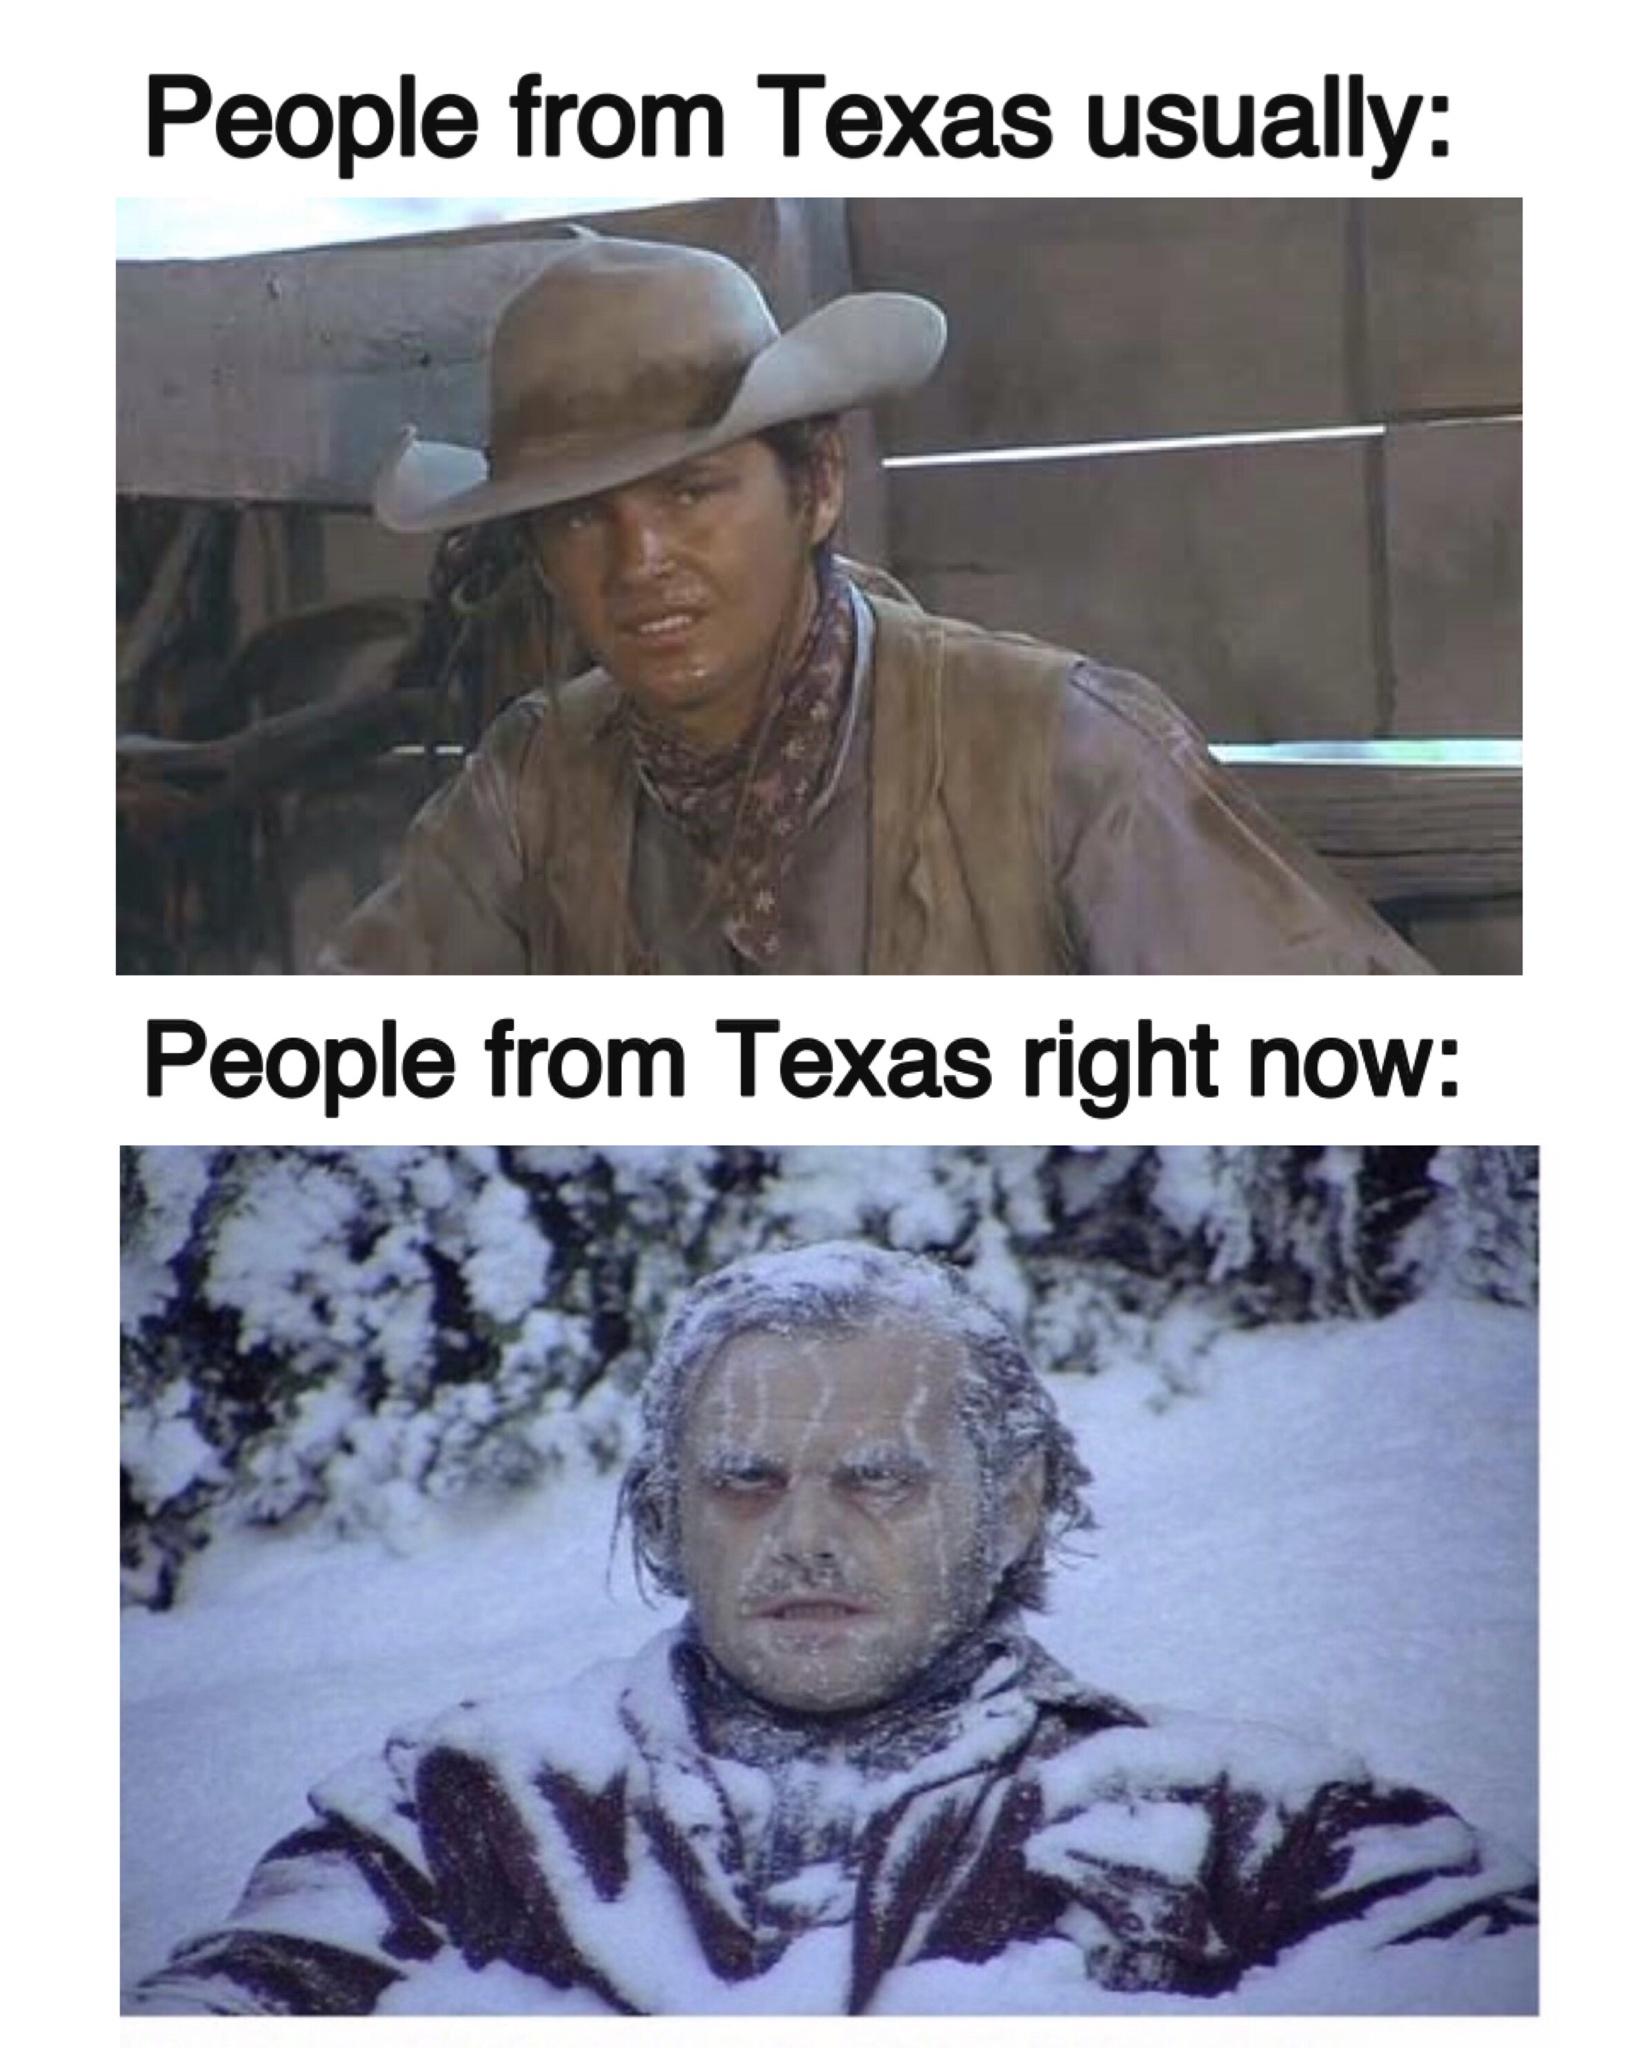 colosseum - People from Texas usually People from Texas right now